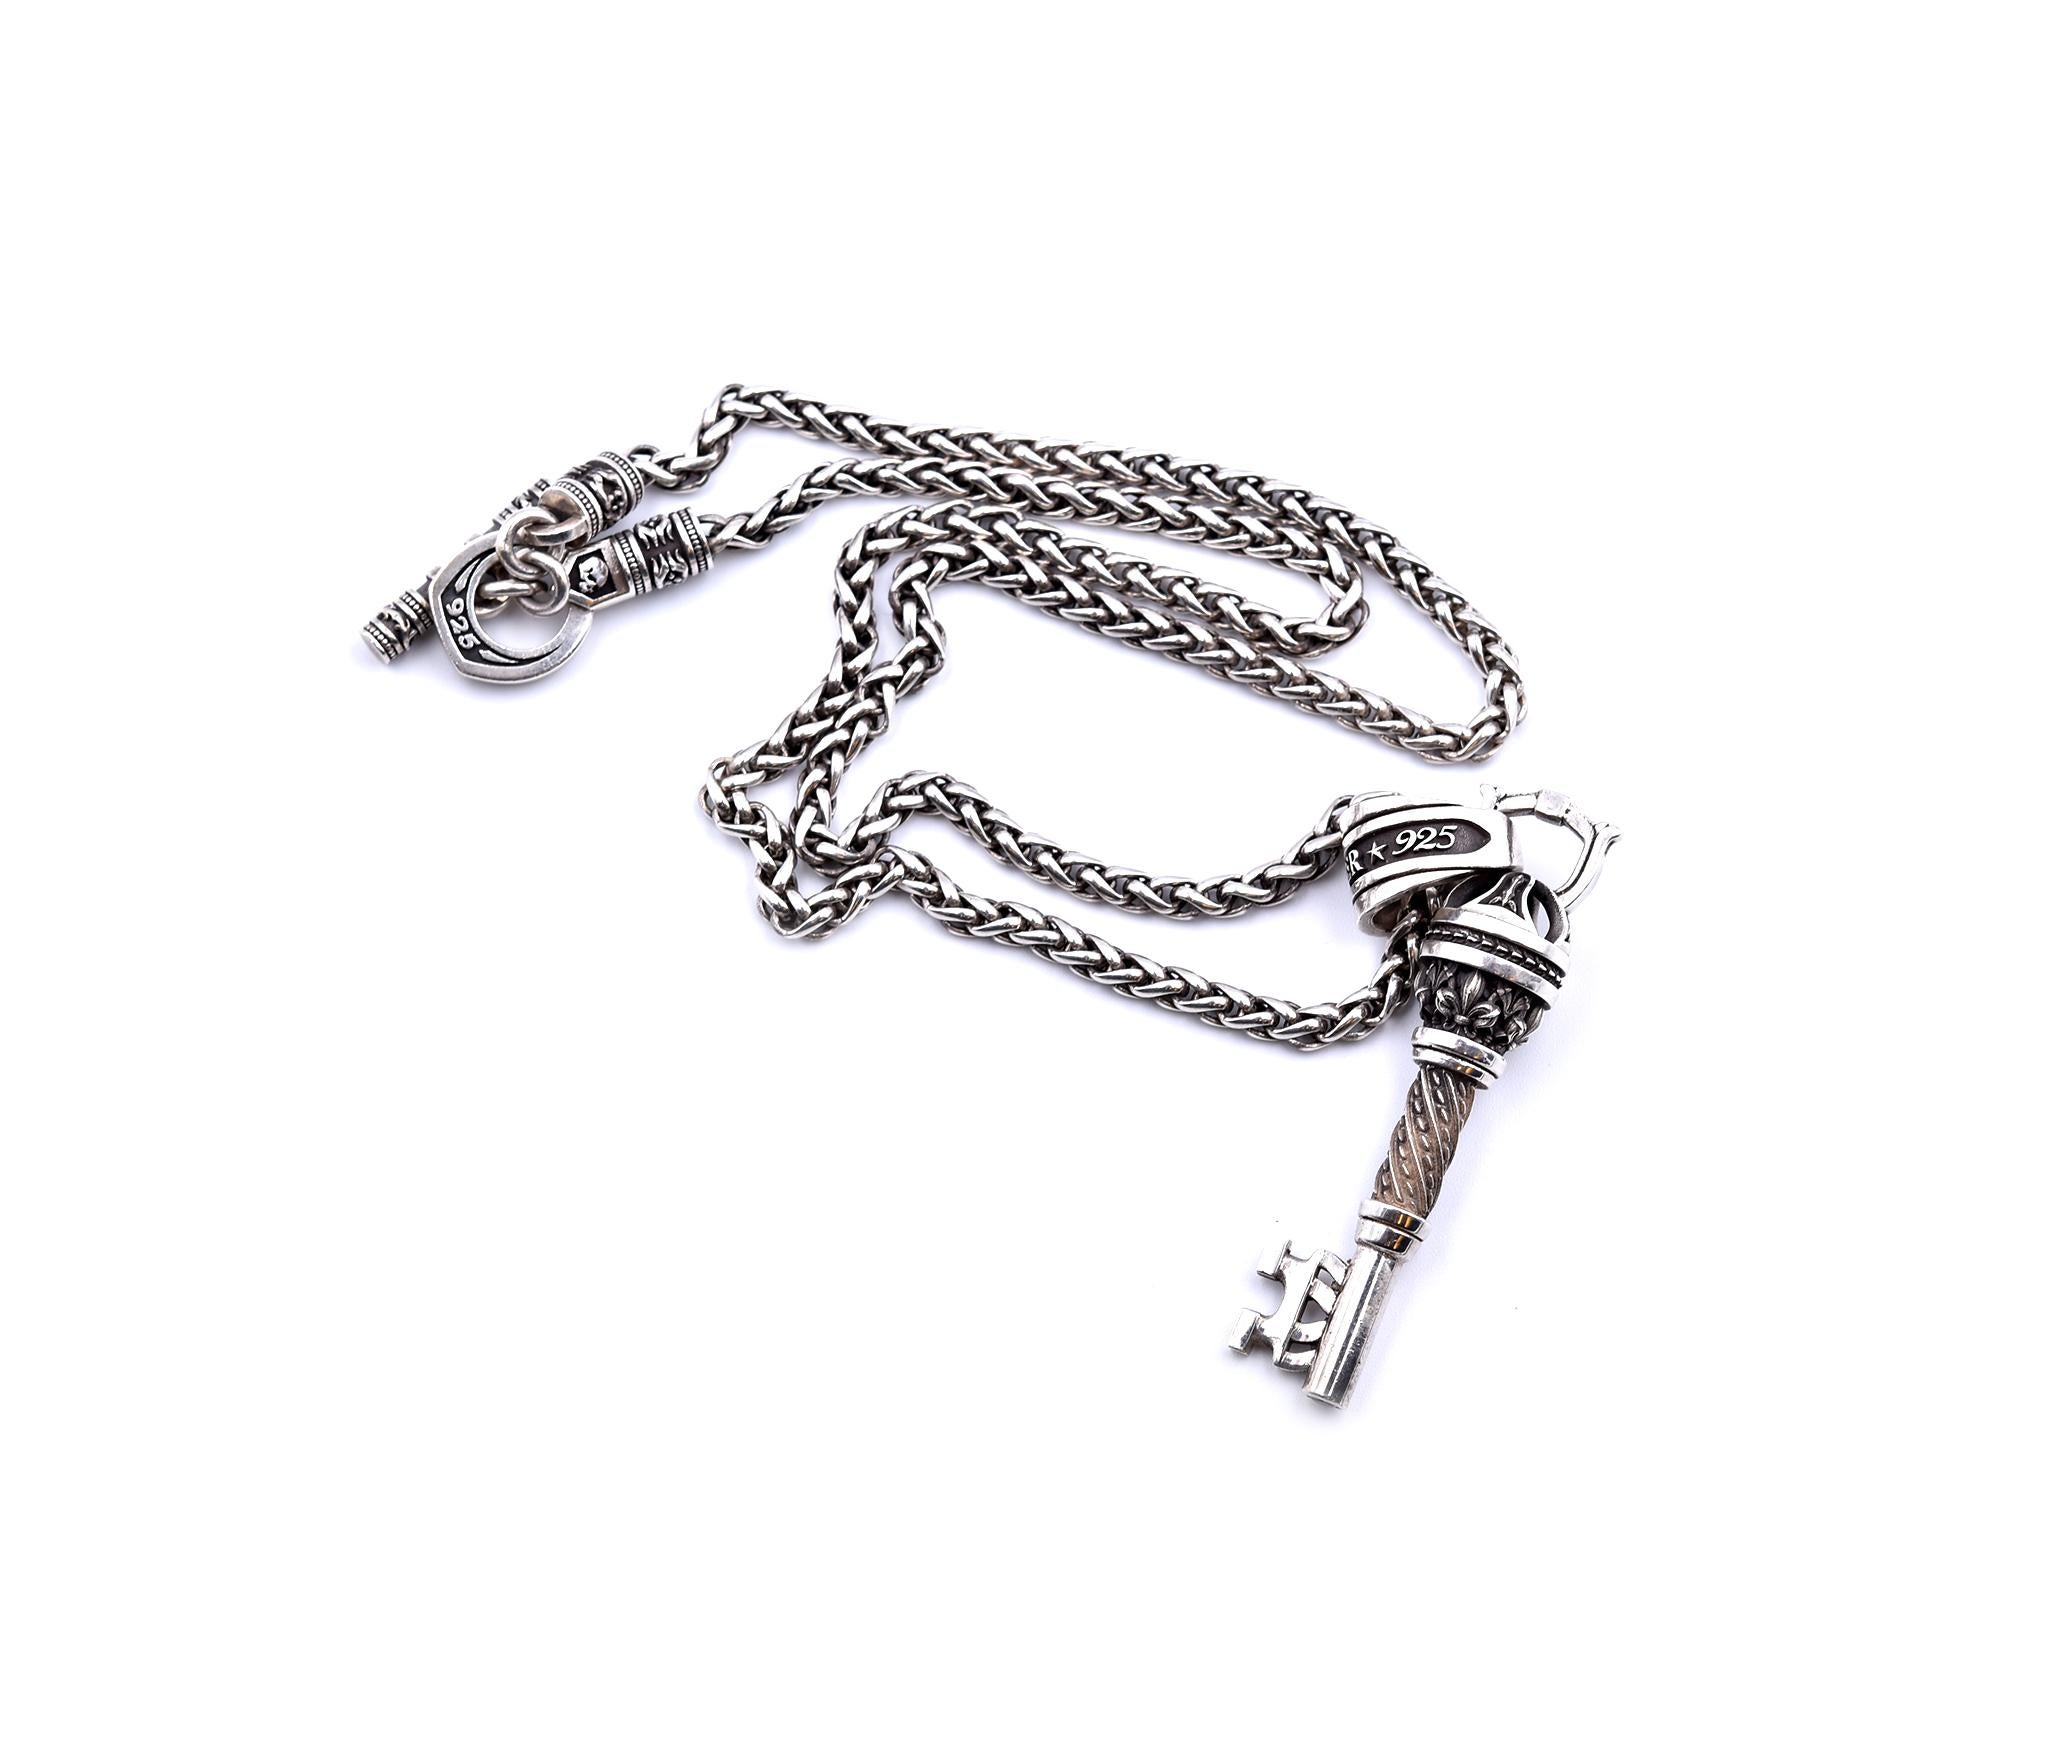 Designer: Night Rider
Material: sterling silver
Dimensions: necklace is 24-inches long and key is 3-inches long and it is 13.07mm-14.32mm wide
Weight: 72.09 grams
